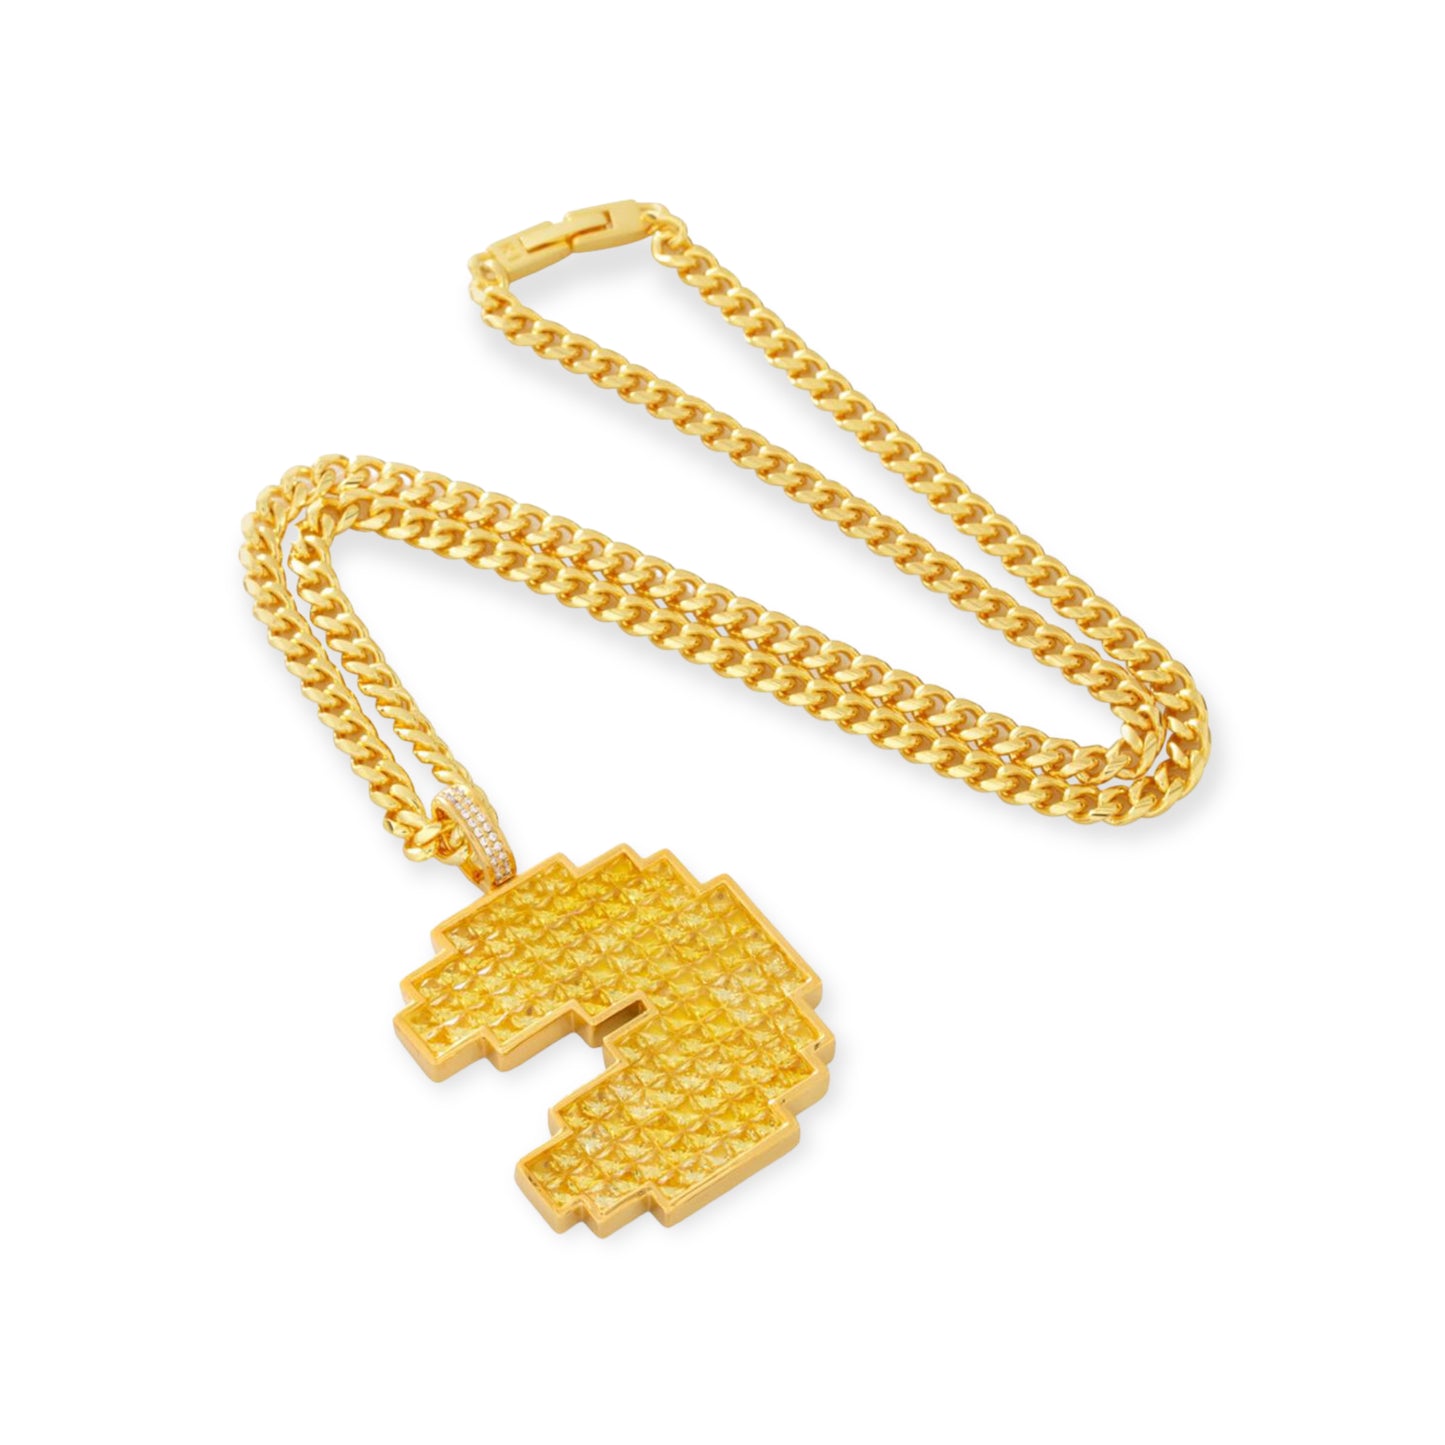 KING ICE: Pac Man Necklace